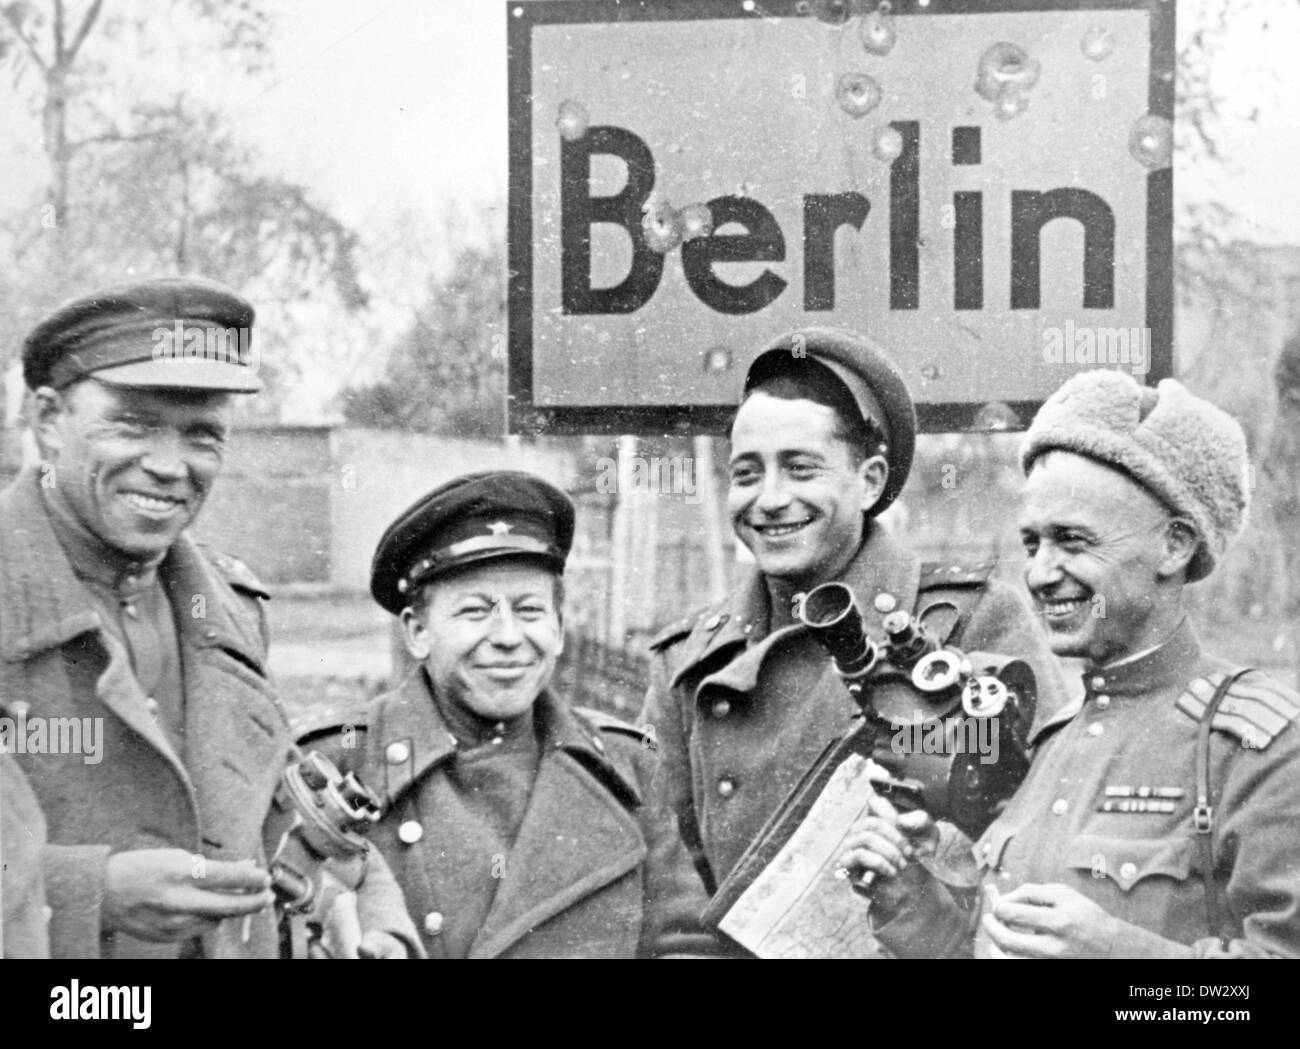 End of the war in Berlin 1945 - Soviet soldiers holding camera equipment and a map are photographed in front of a city sign in Berlin, Germany. Fotoarchiv für Zeitgeschichte - NO WIRE SERVICE Stock Photo